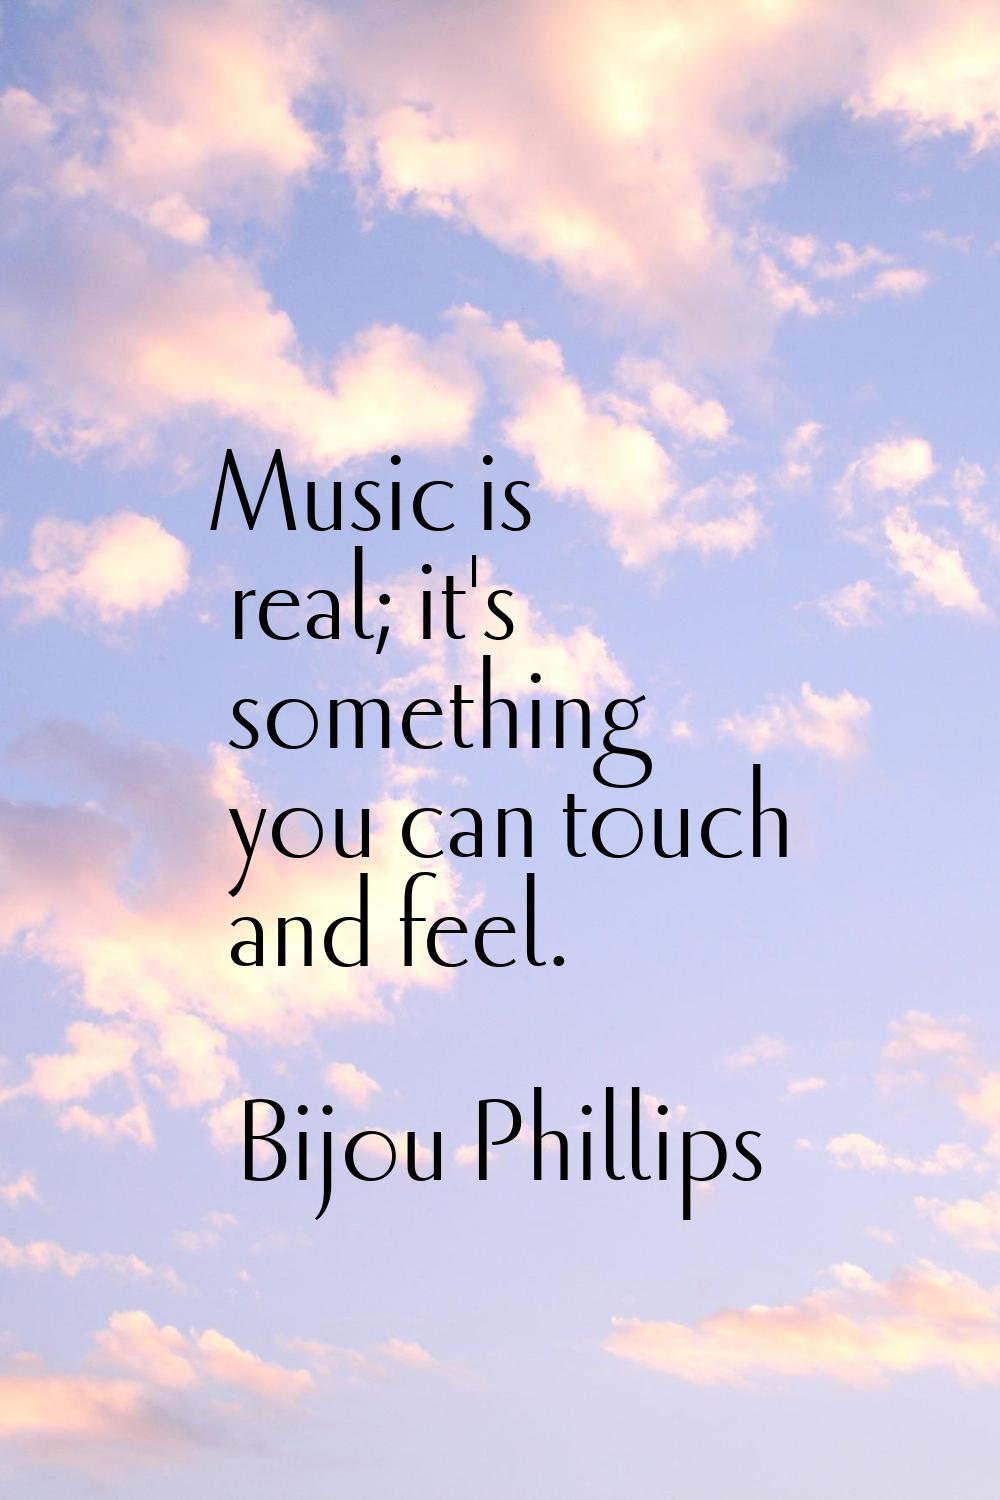 Music is real; it's something you can touch and feel.